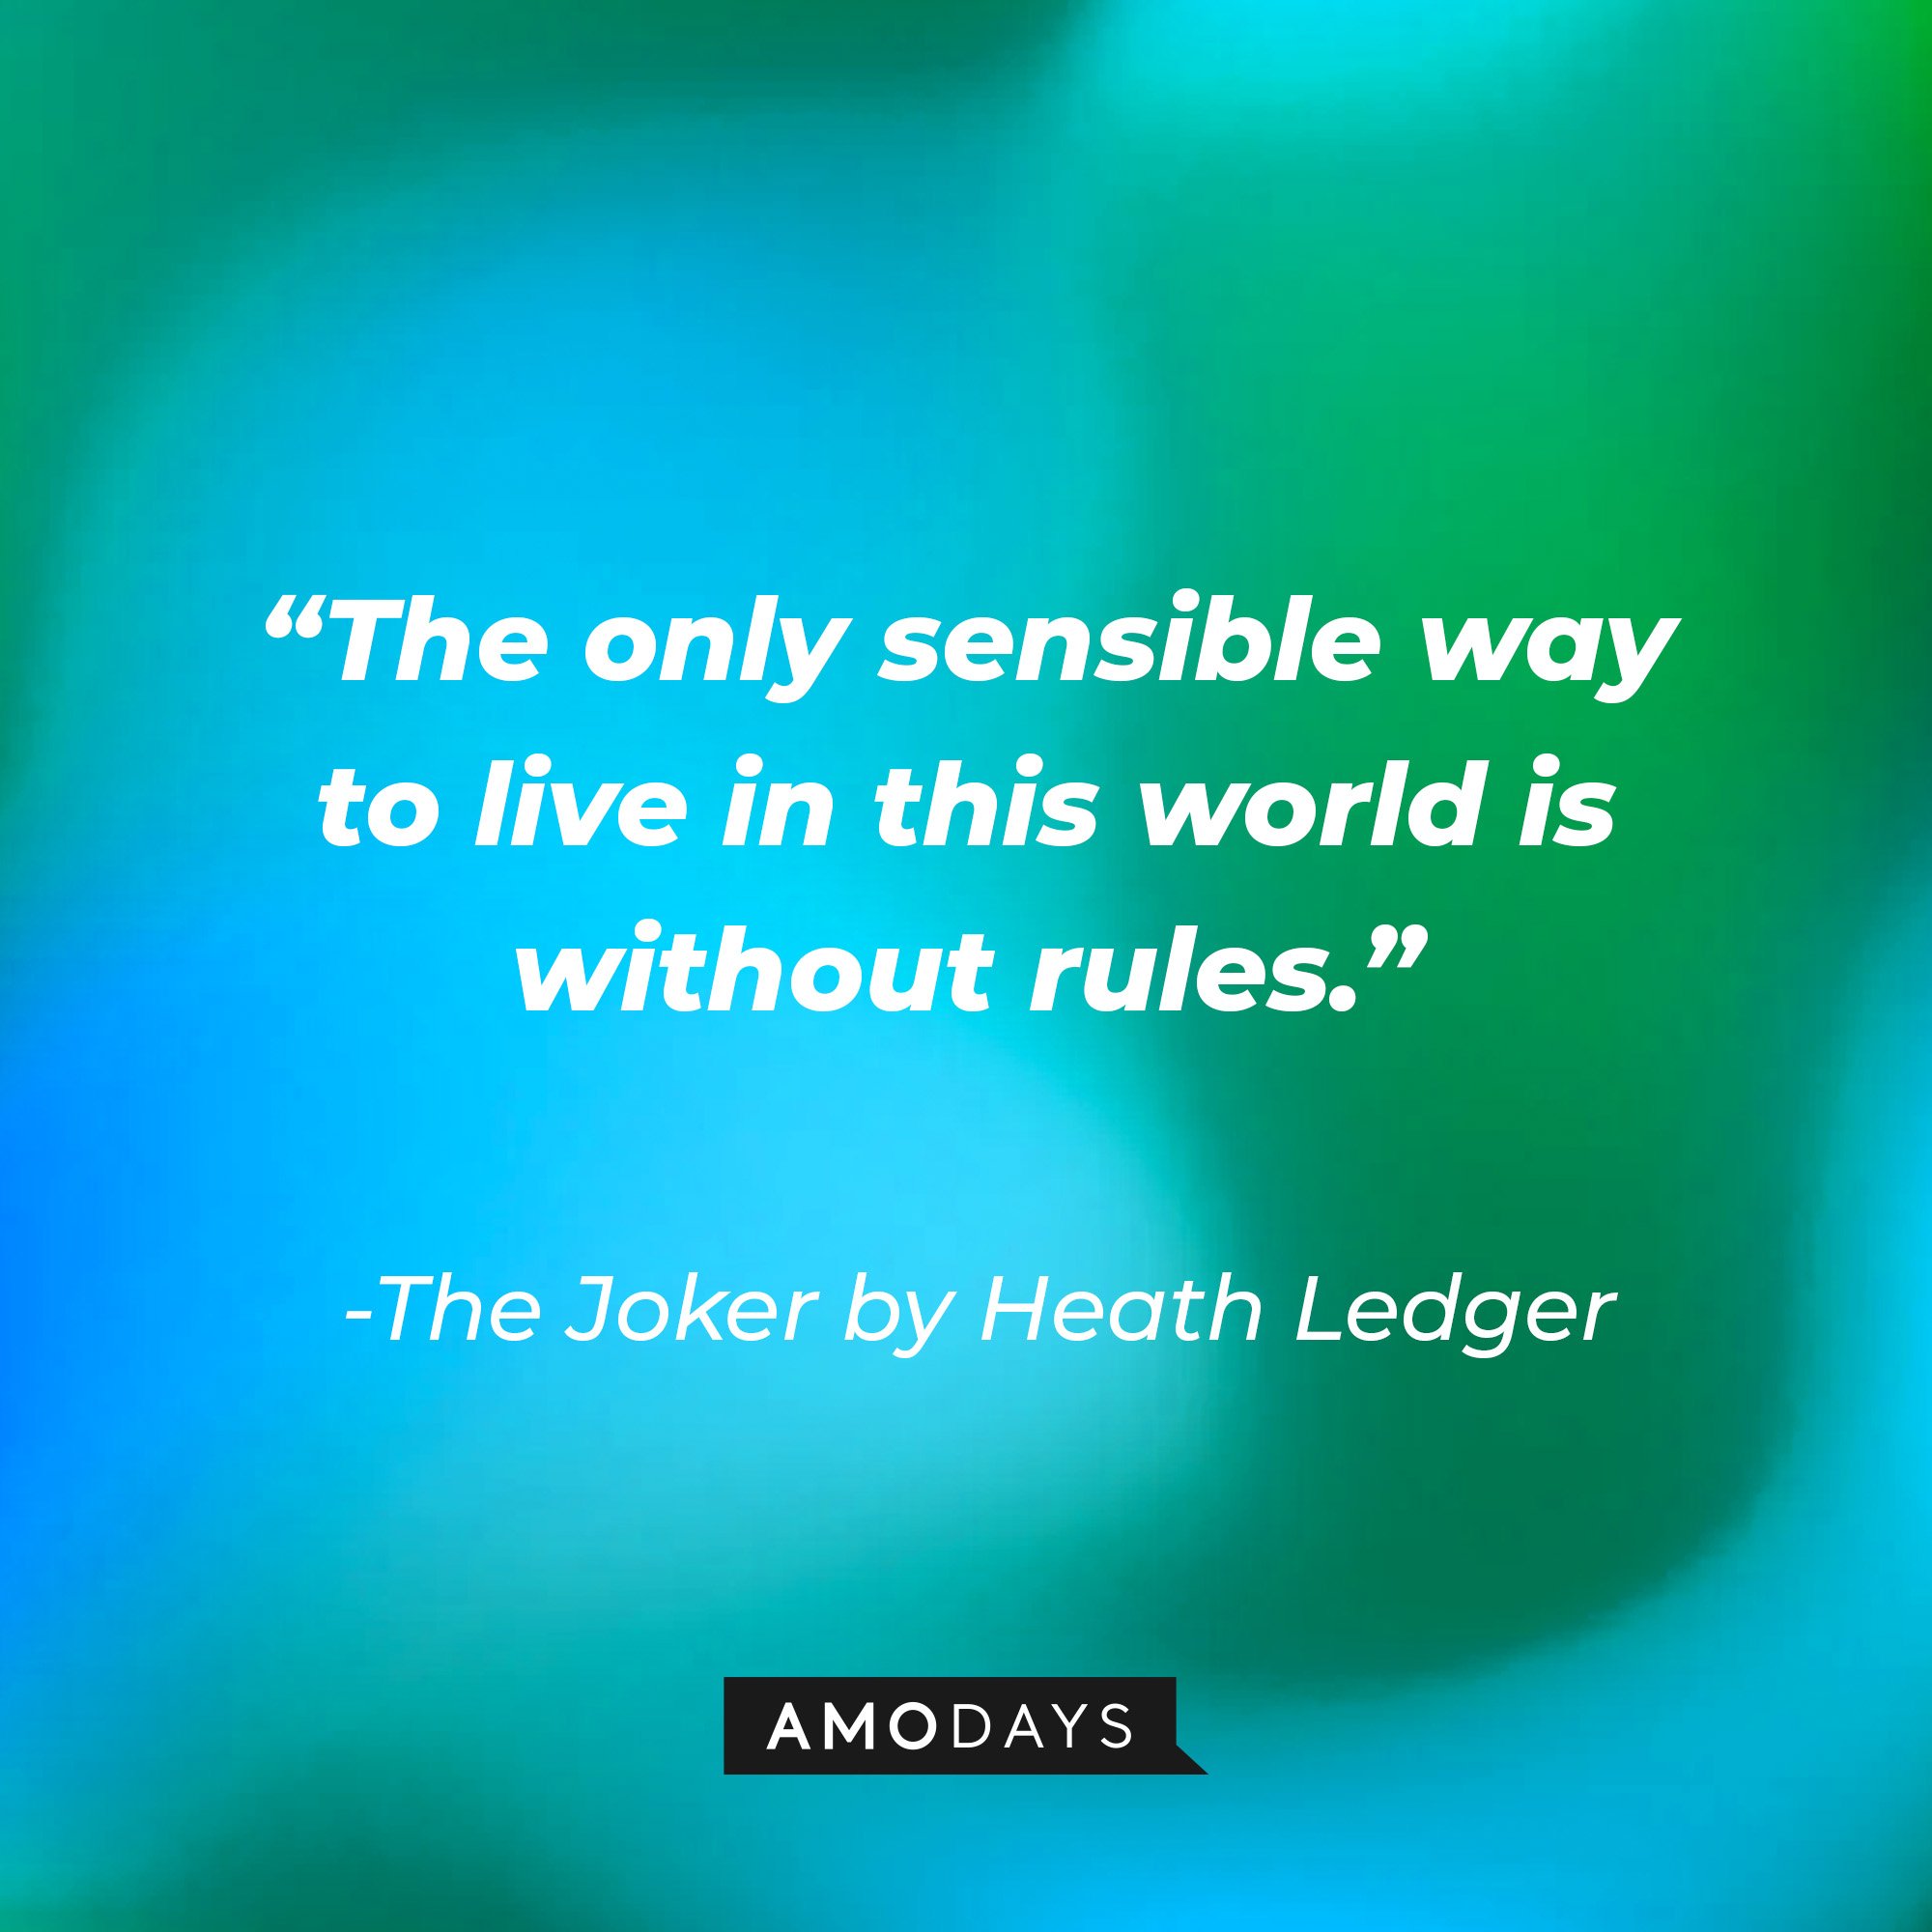 The Joker in Christopher Nolan’s “The Dark Night” quote: “The only sensible way to live is without rules.” | Image: Amodays